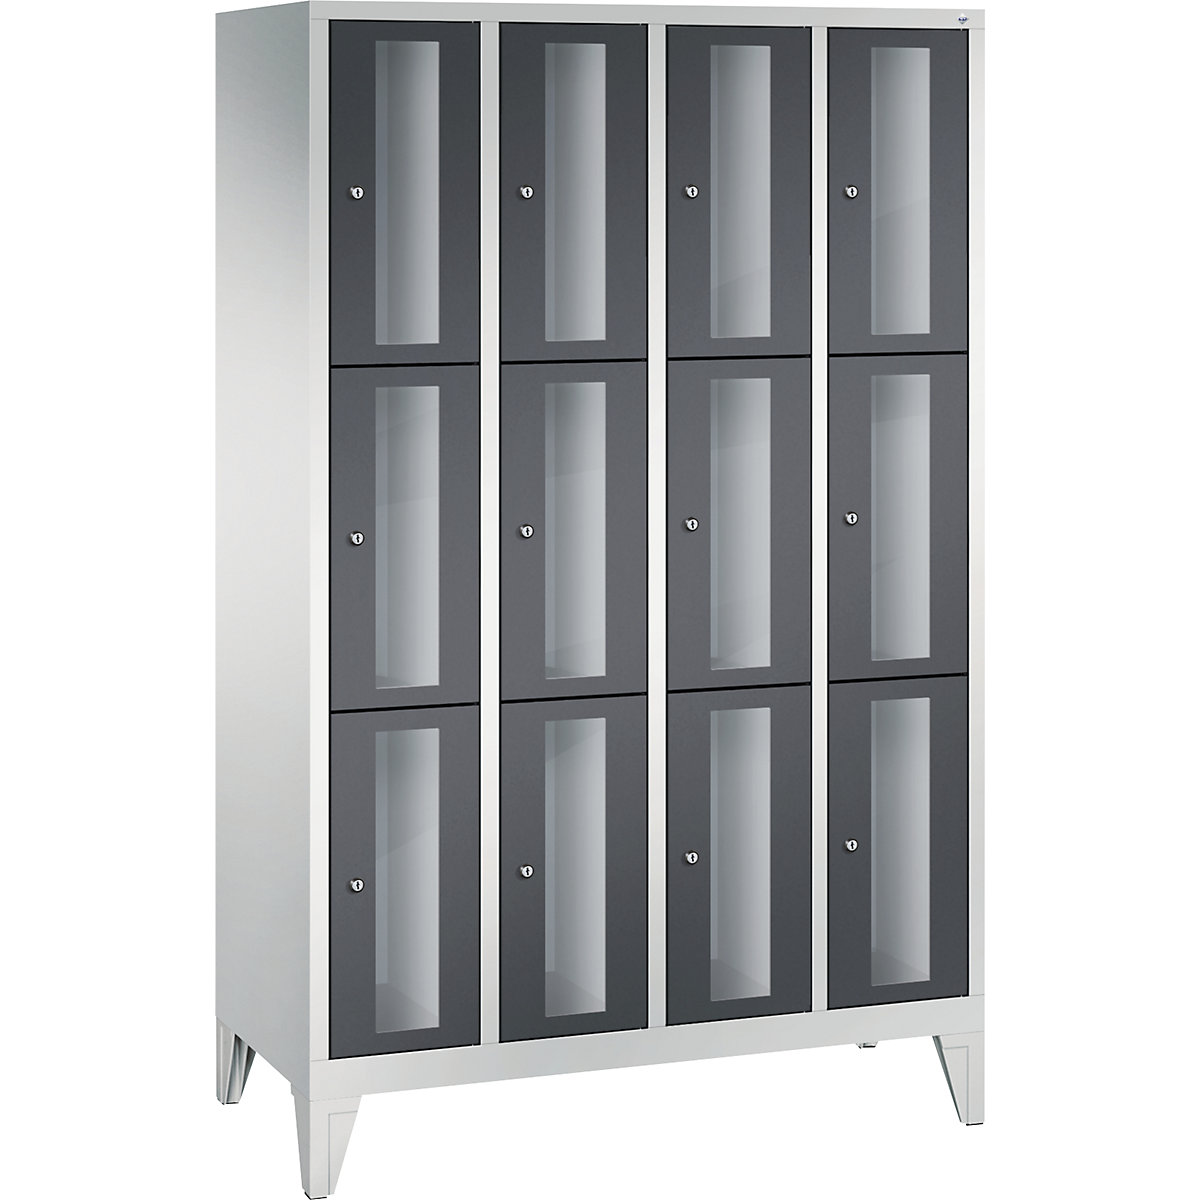 CLASSIC locker unit, compartment height 510 mm, with feet – C+P, 12 compartments, width 1190 mm, black grey door-6